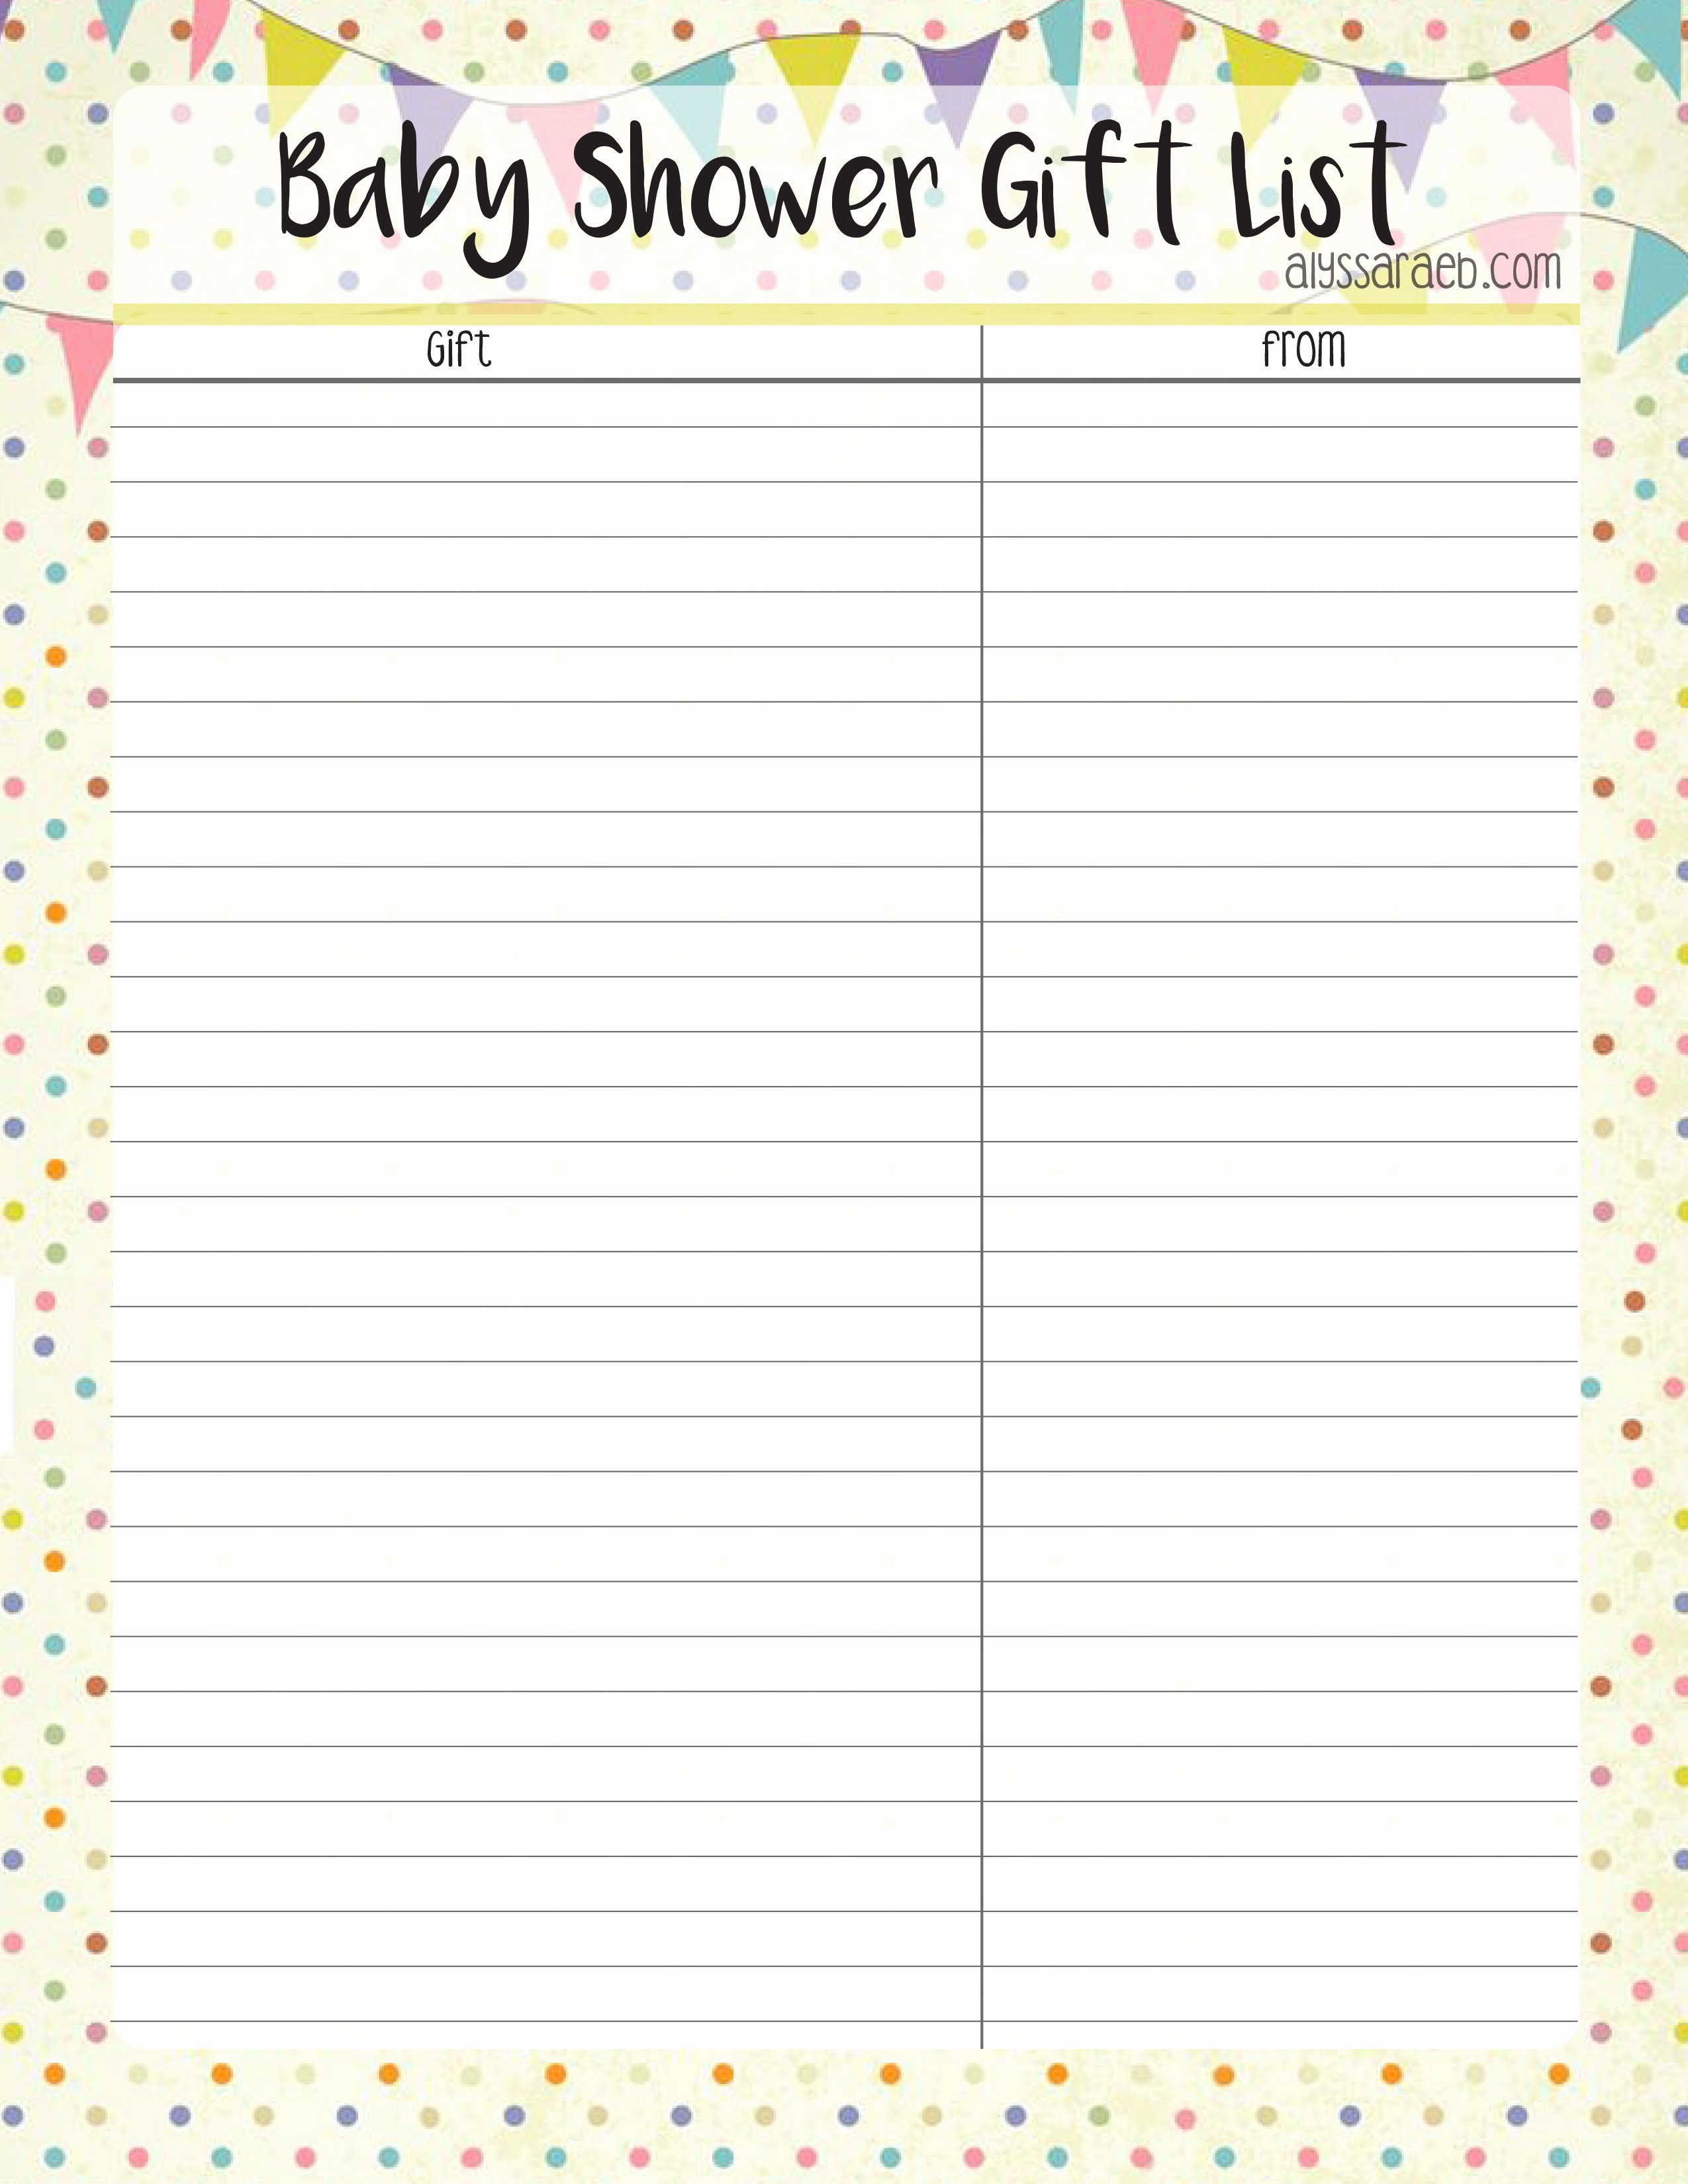 Baby Shower Gift List Template Best Of Baby Shower Gift List Template – Alyssa Rae